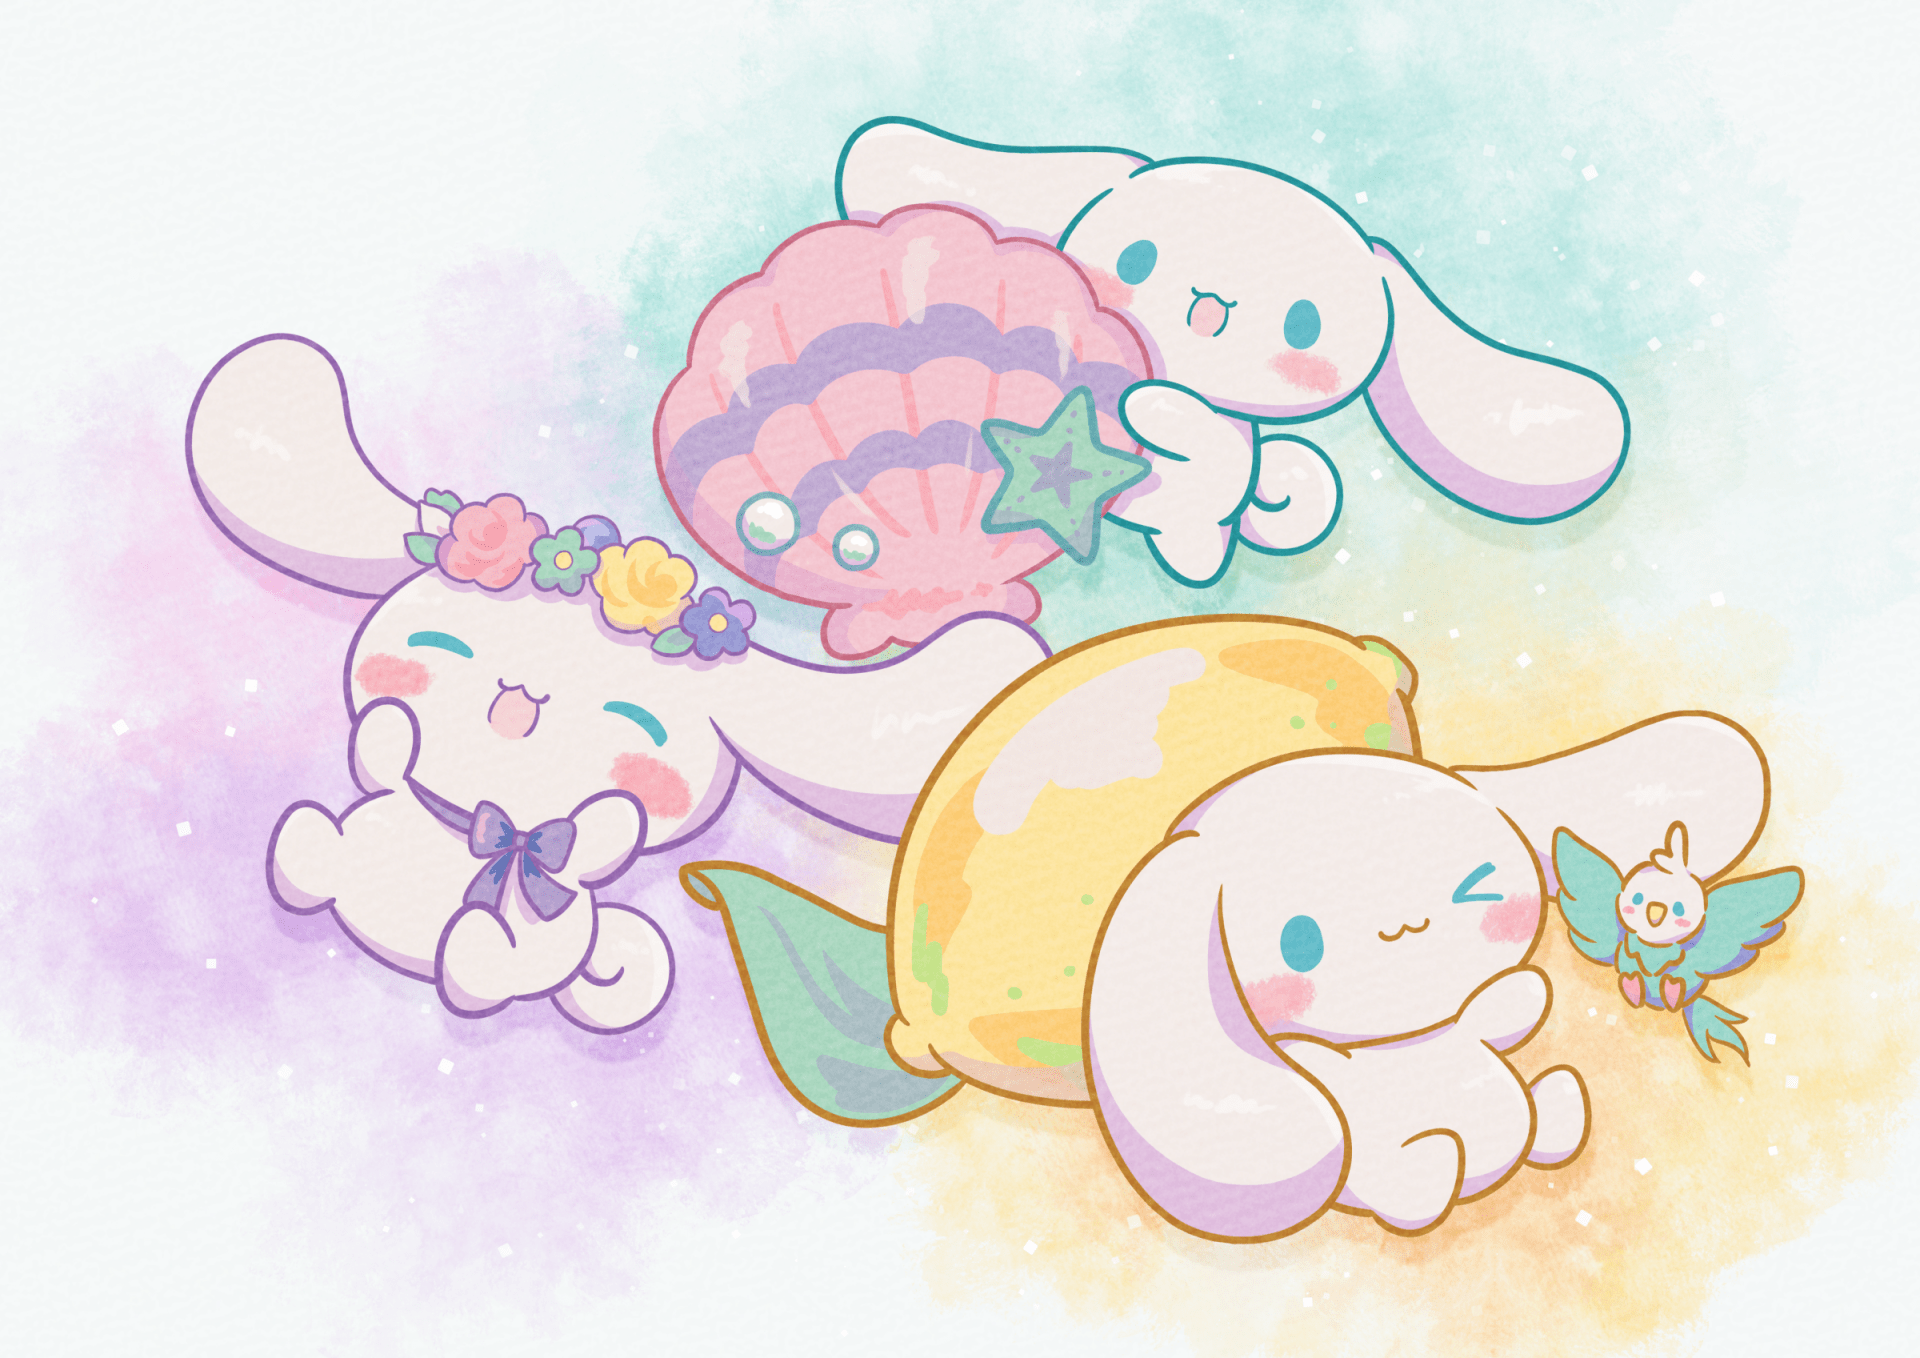 A group of cute little animals are sitting together - Cinnamoroll